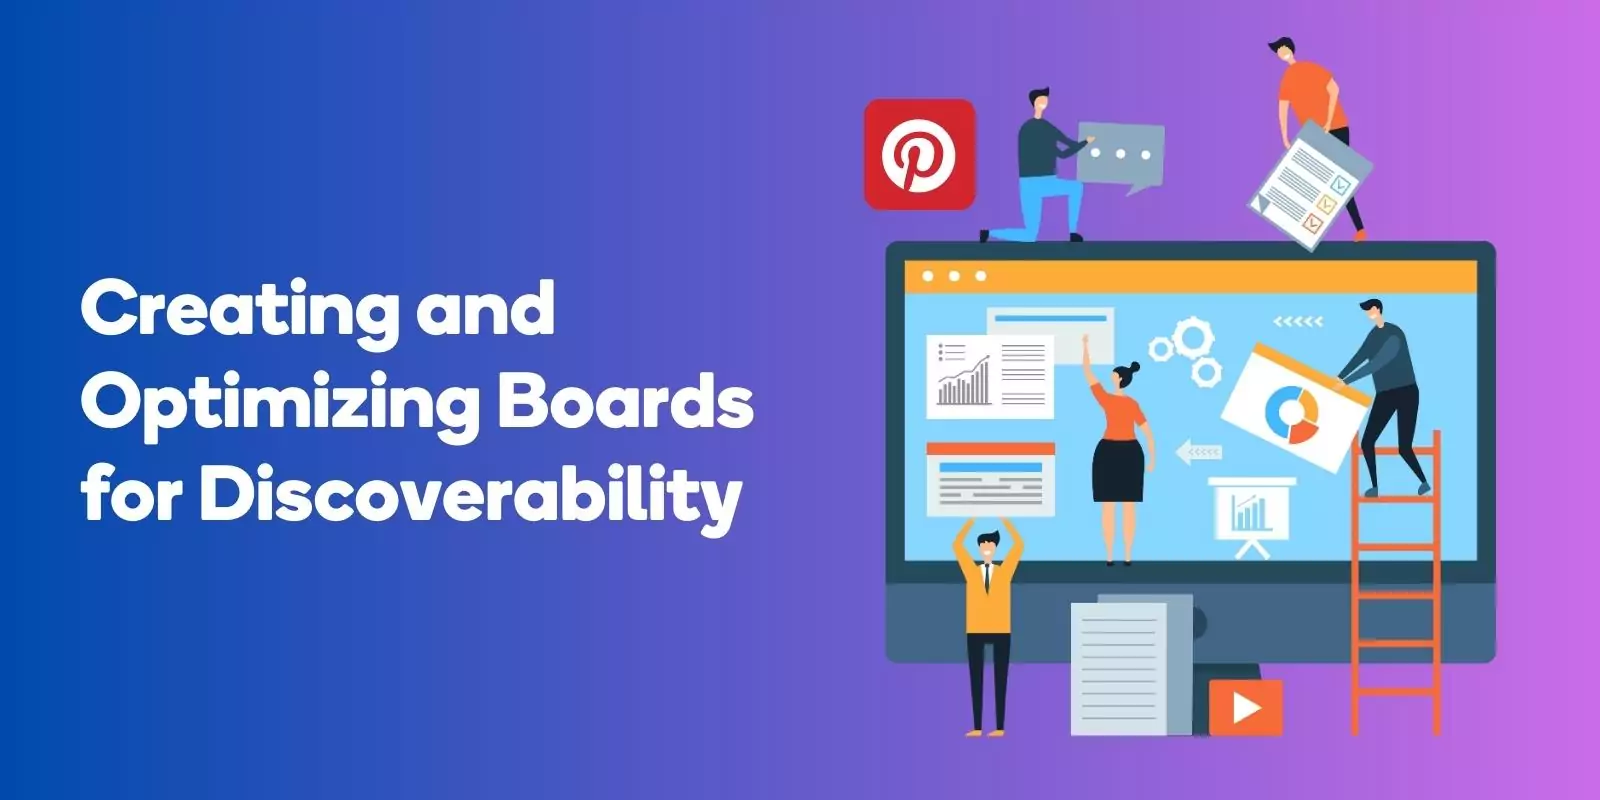 Creating and Optimizing Boards for Discoverability